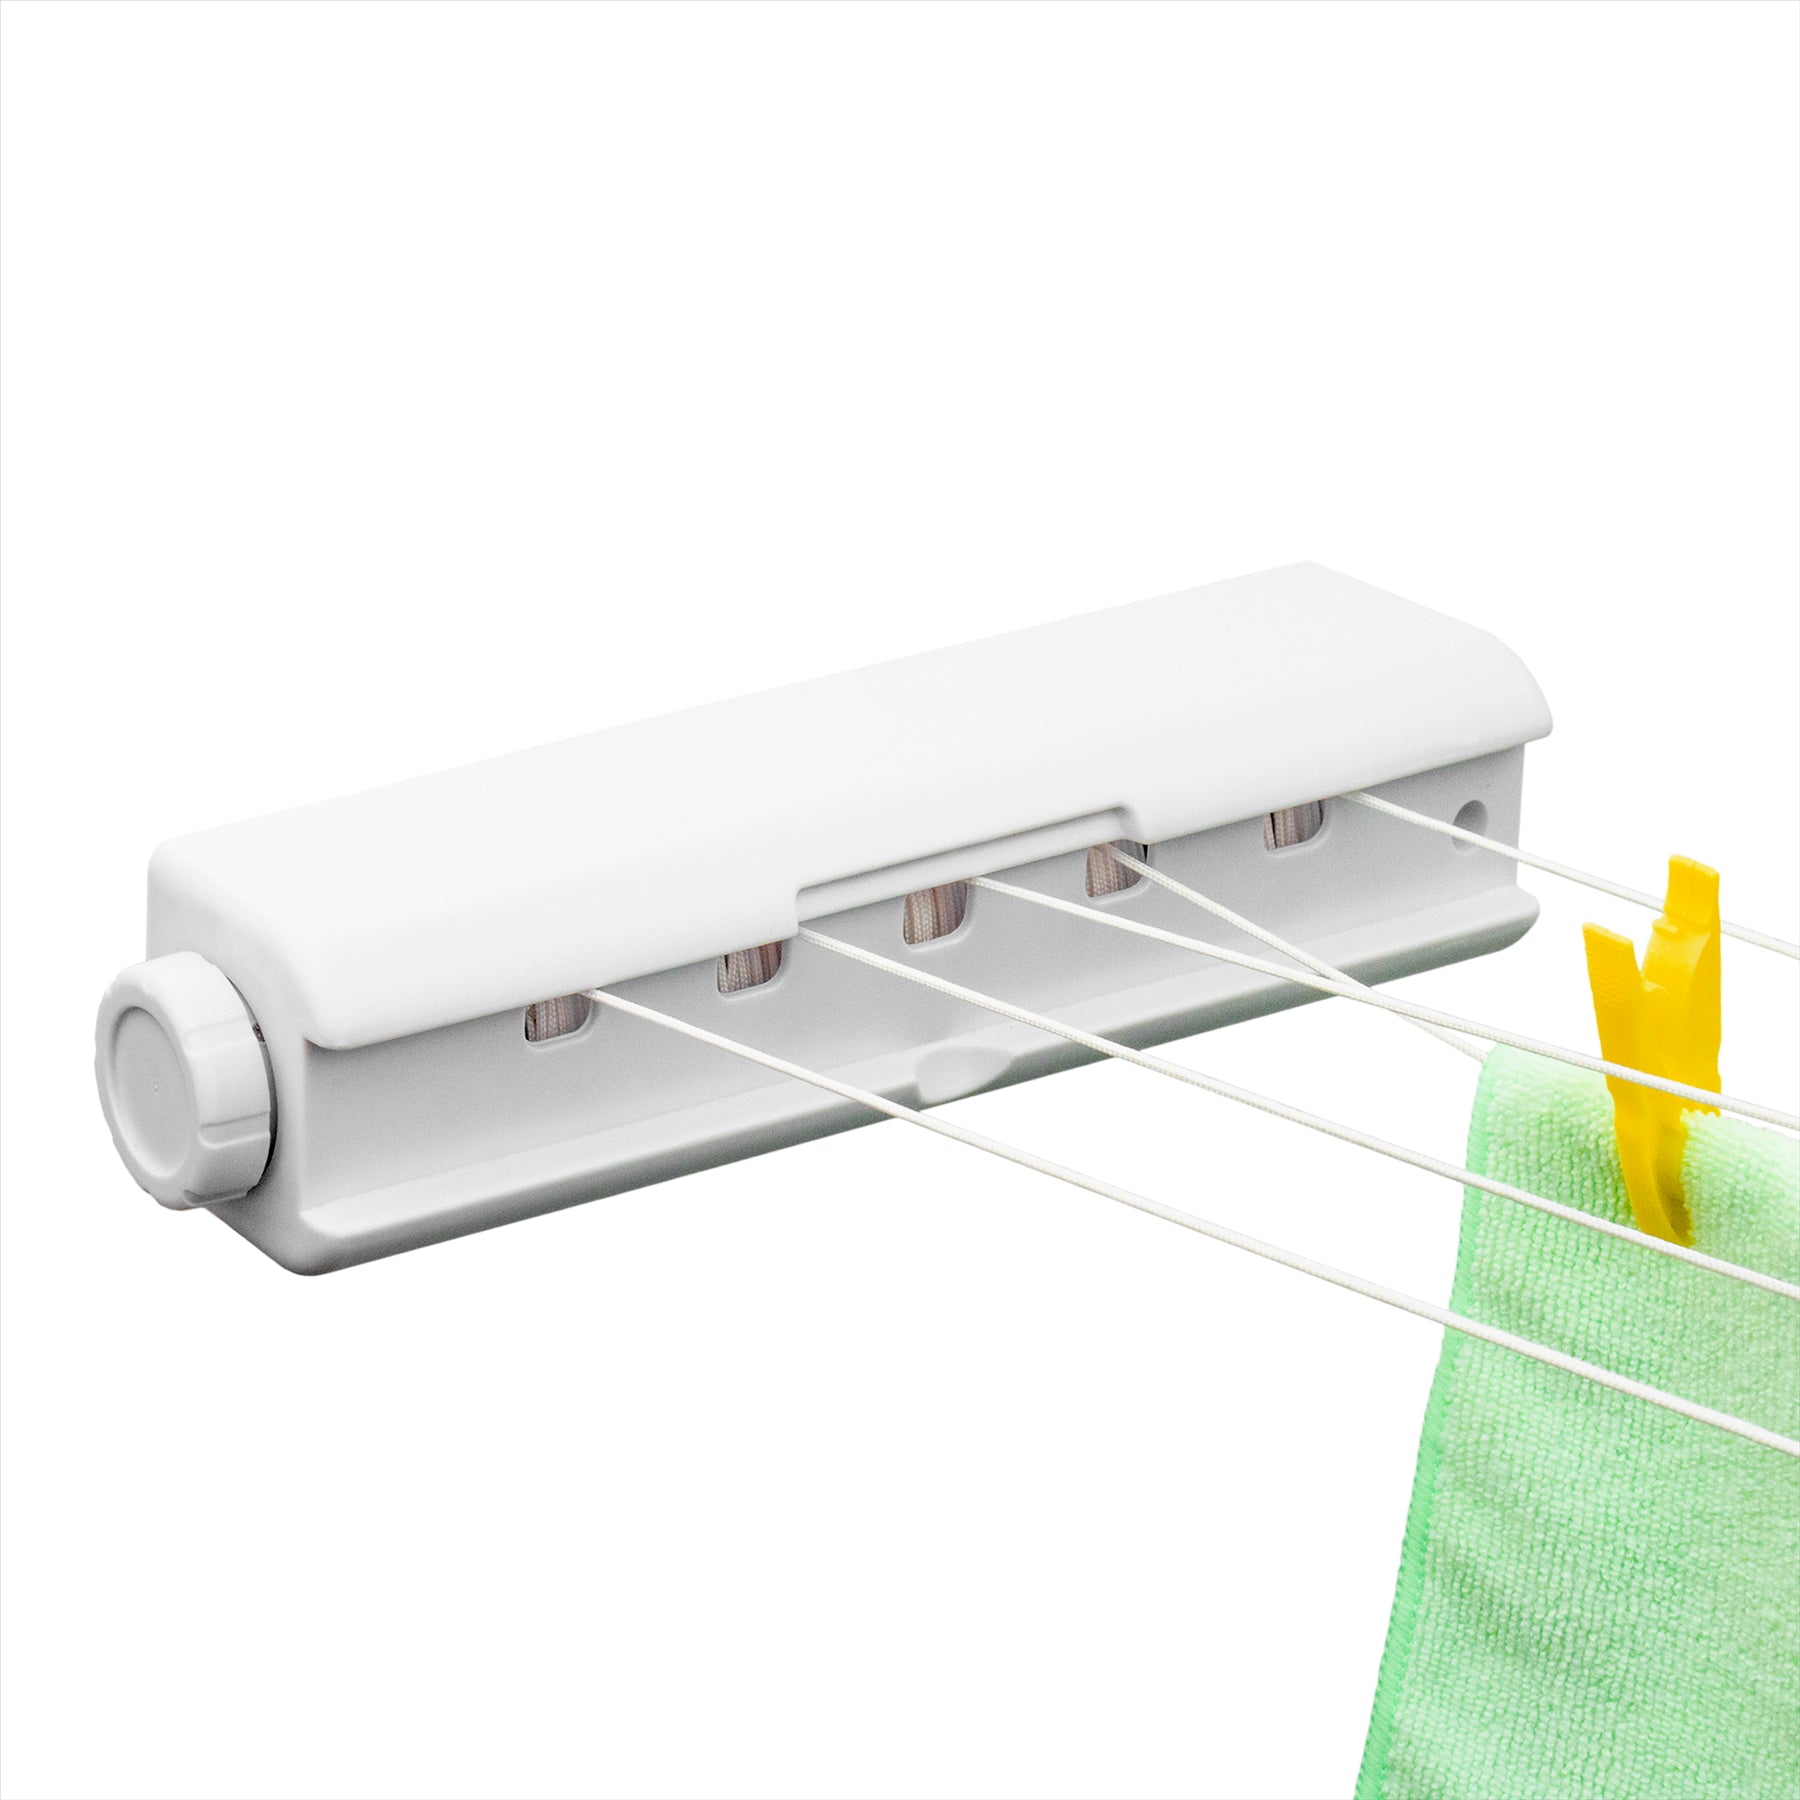 KCT Retractable 5 Line Laundry Airer 18m Wall Mounted Clothes Dryer